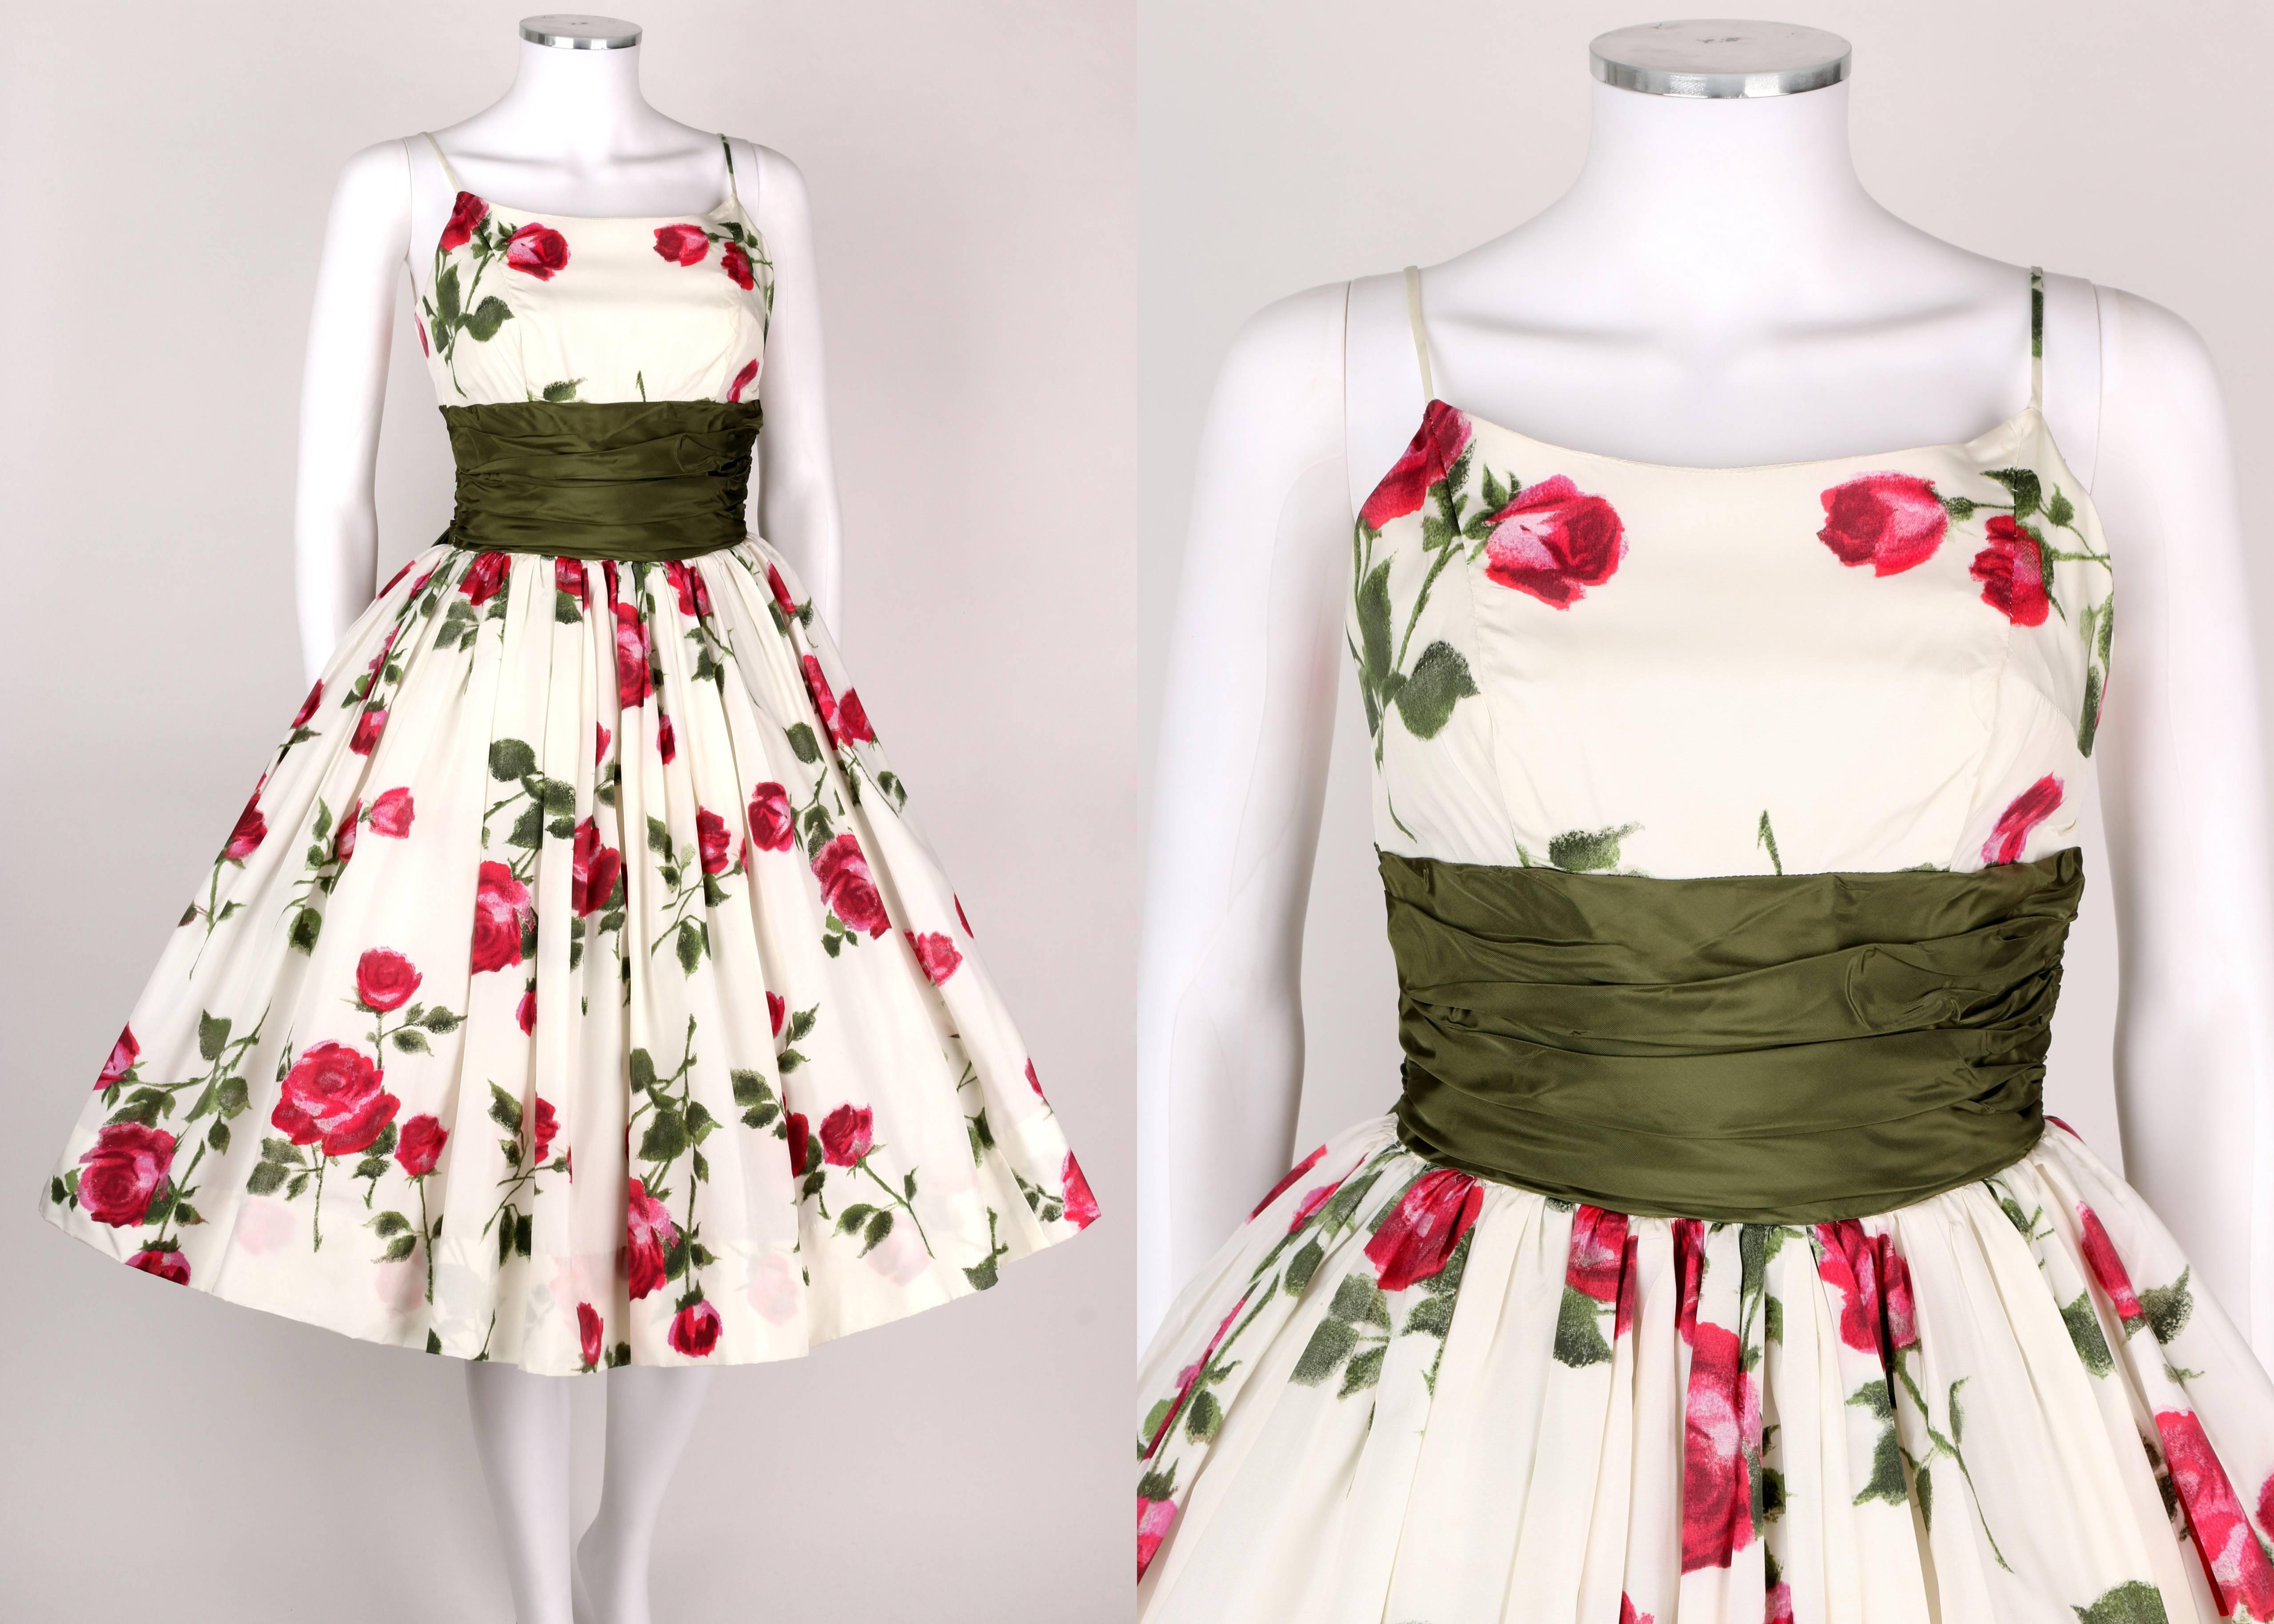 Vintage c. 1950s white, green and magenta pink rose print taffeta party dress. Spaghetti straps. Tea length. Wide olive green taffeta attached cumberbund sash with large bow at back. Skirt has layered lining of tulle, taffeta and crinoline for